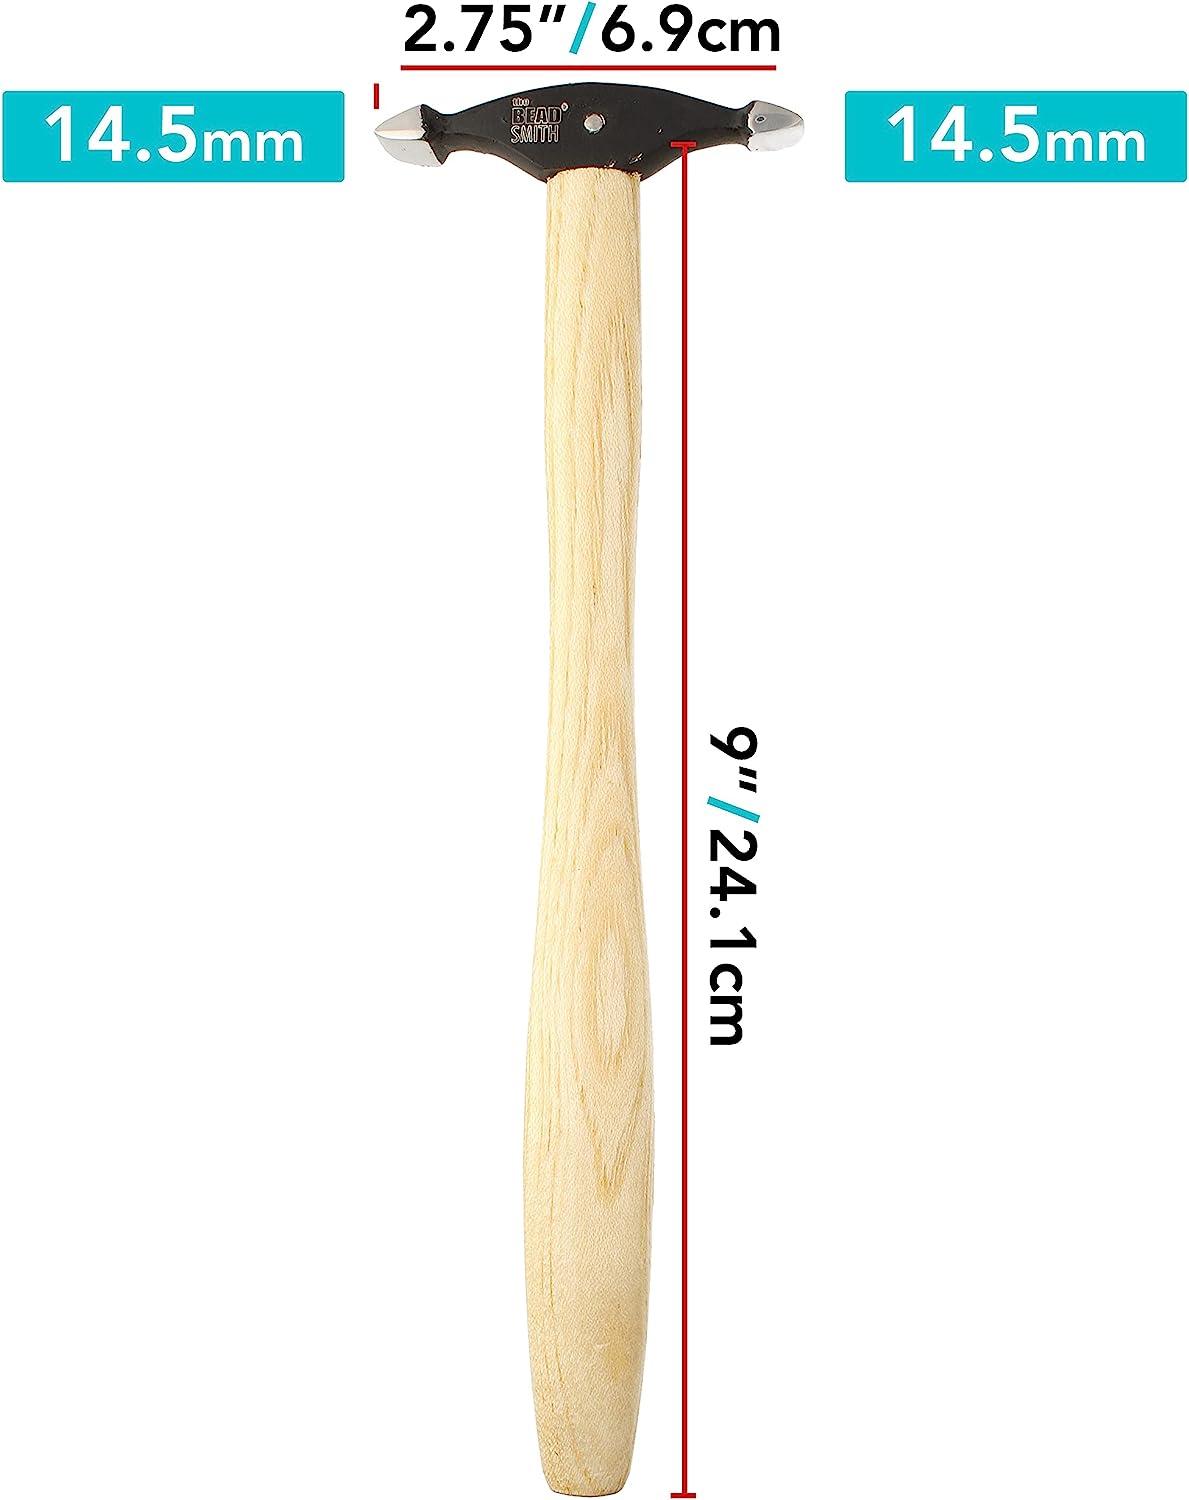 The Beadsmith Sharp Texturing Hammer - 9 Inches with Wooden Handle,  73.5mm,1.2oz Steel Head with Two 12mm Faces - Texturing Tool Used to Add  Patterns & Dimension to Metalwork Sharp Texturing 9In. 12mm